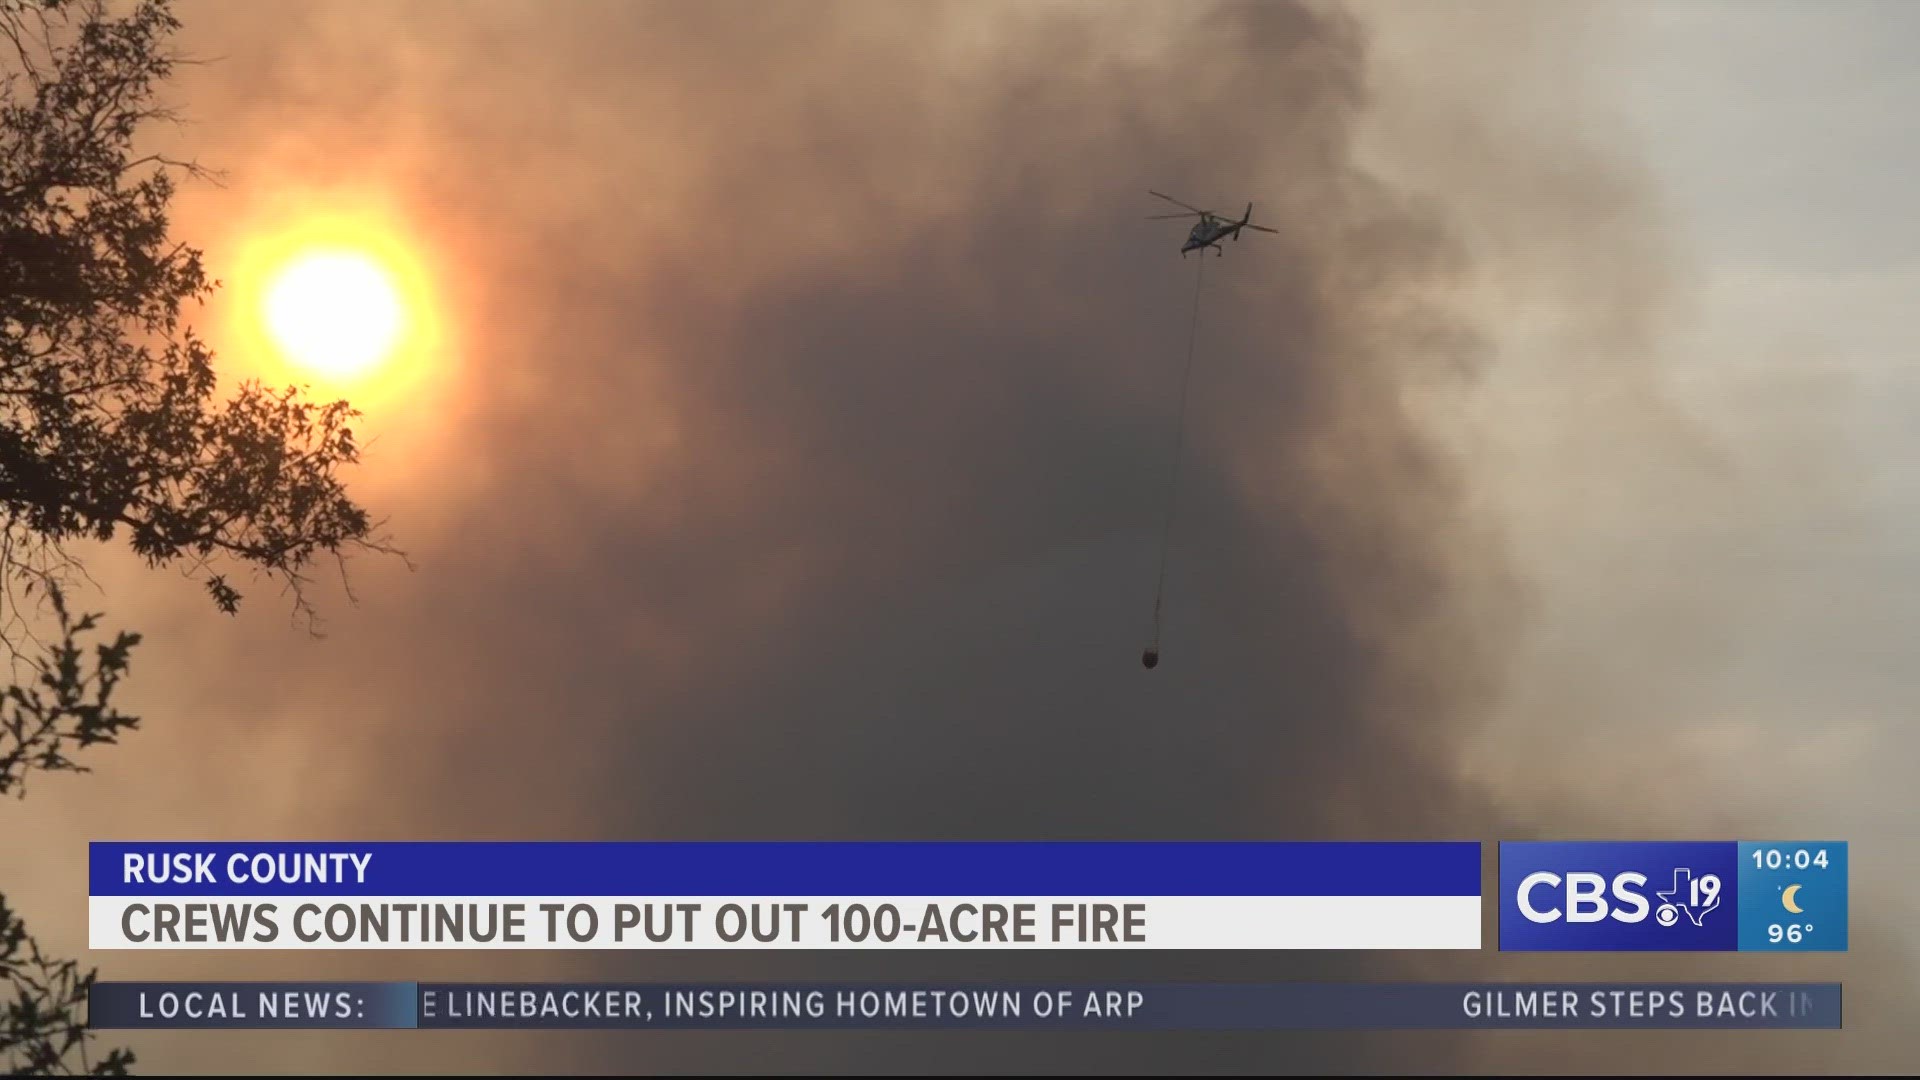 Crews continue to put out 100-acre wildfire in Rusk County